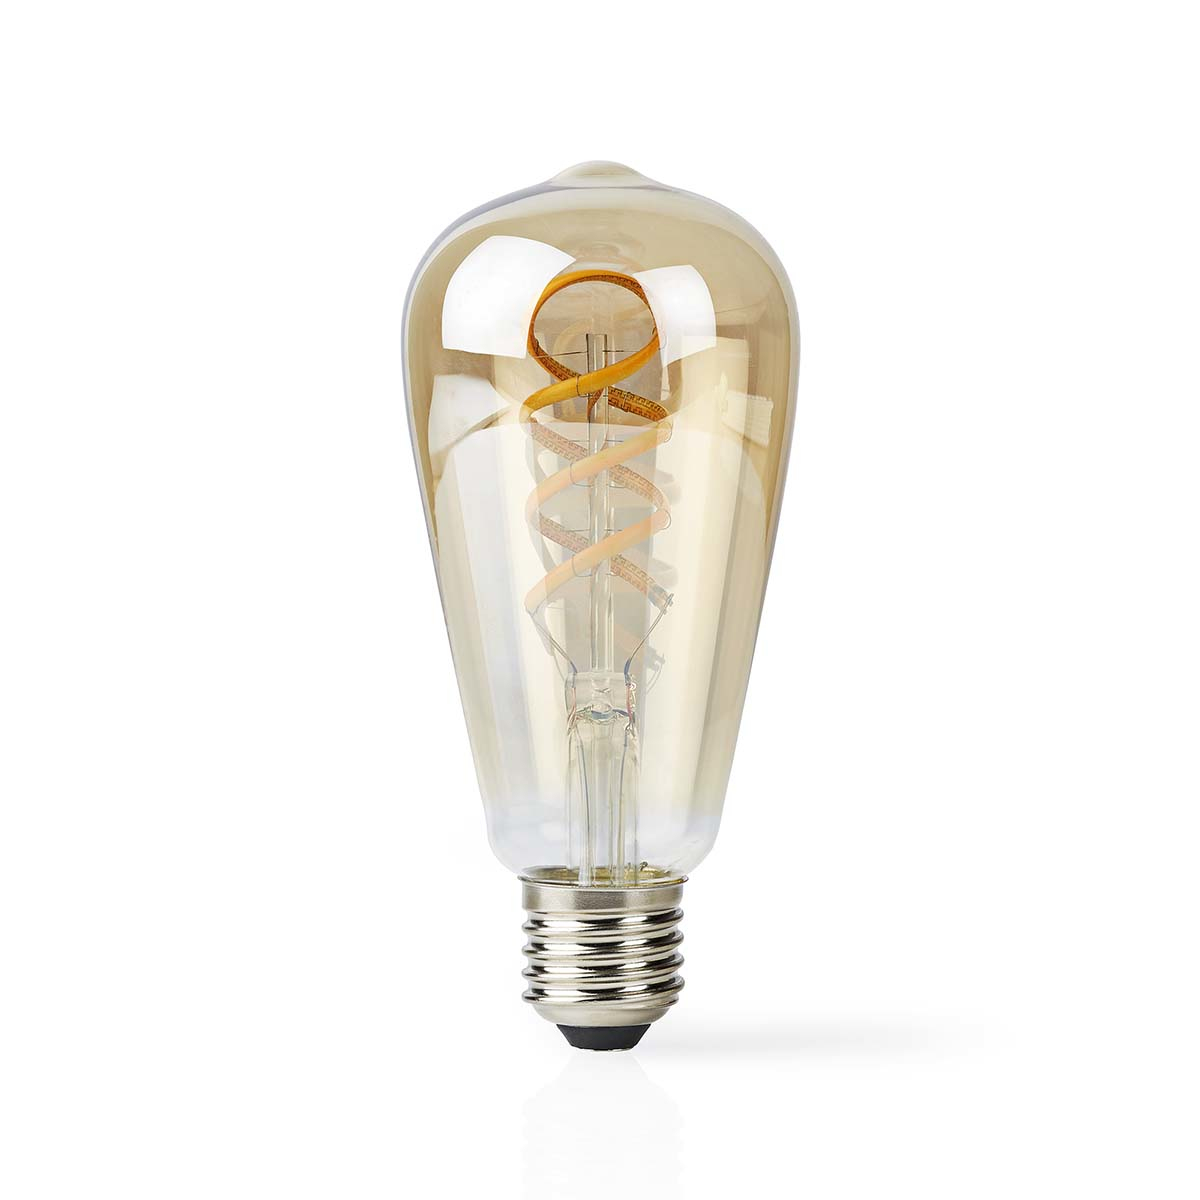 Nedis Smartlife LED Filament Lampe| WLAN| E27| 360 lm| 4.9 W| Warm to Cool White|